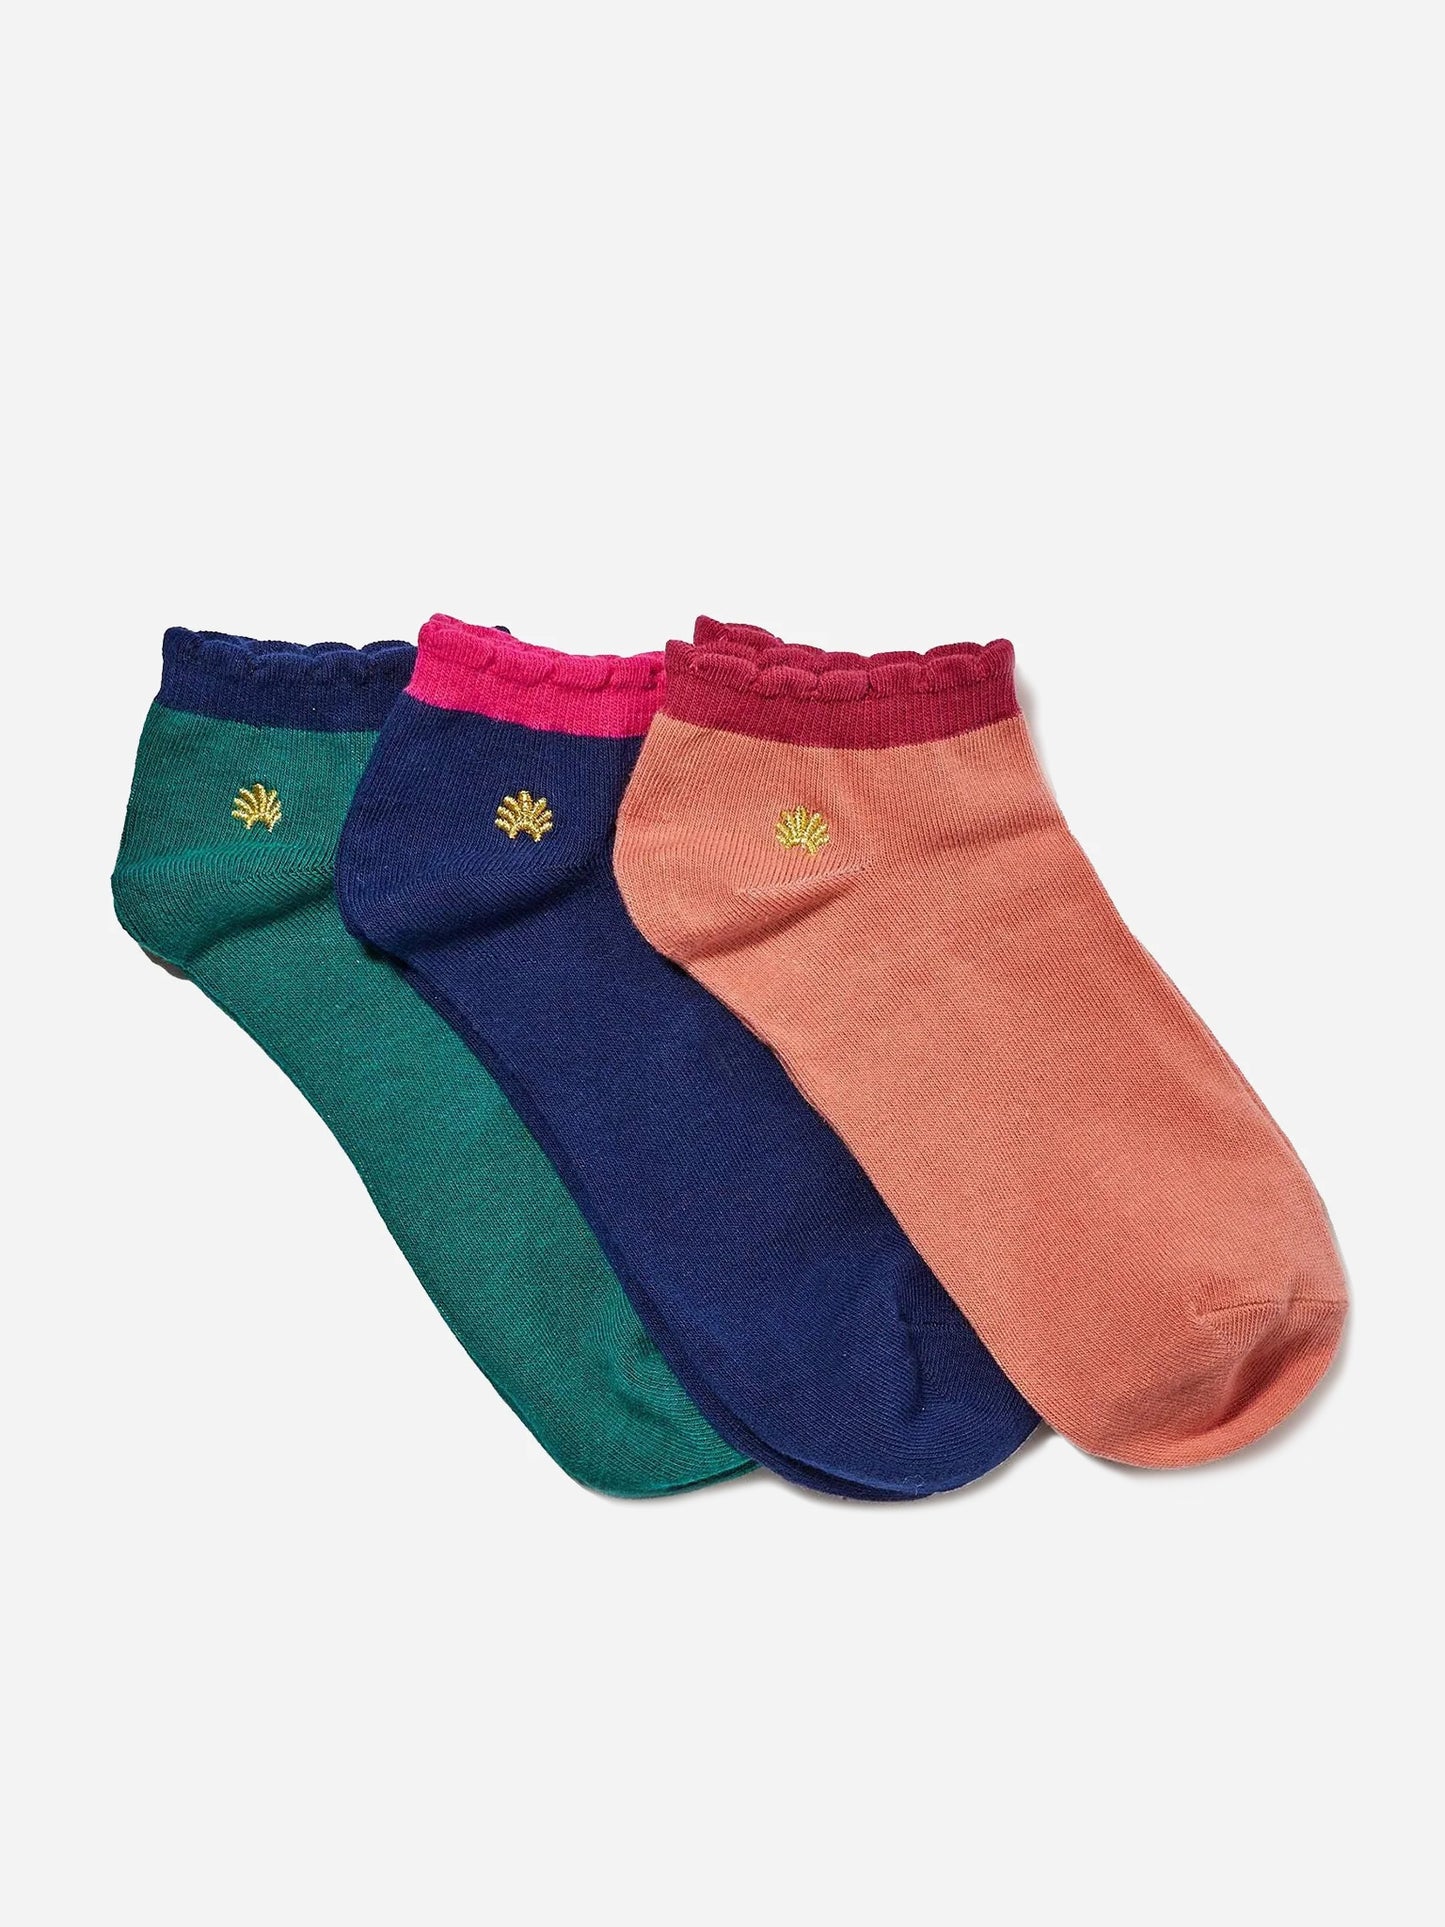 Lele Sadoughi Women's Country Club 3-Pack Ankle Socks